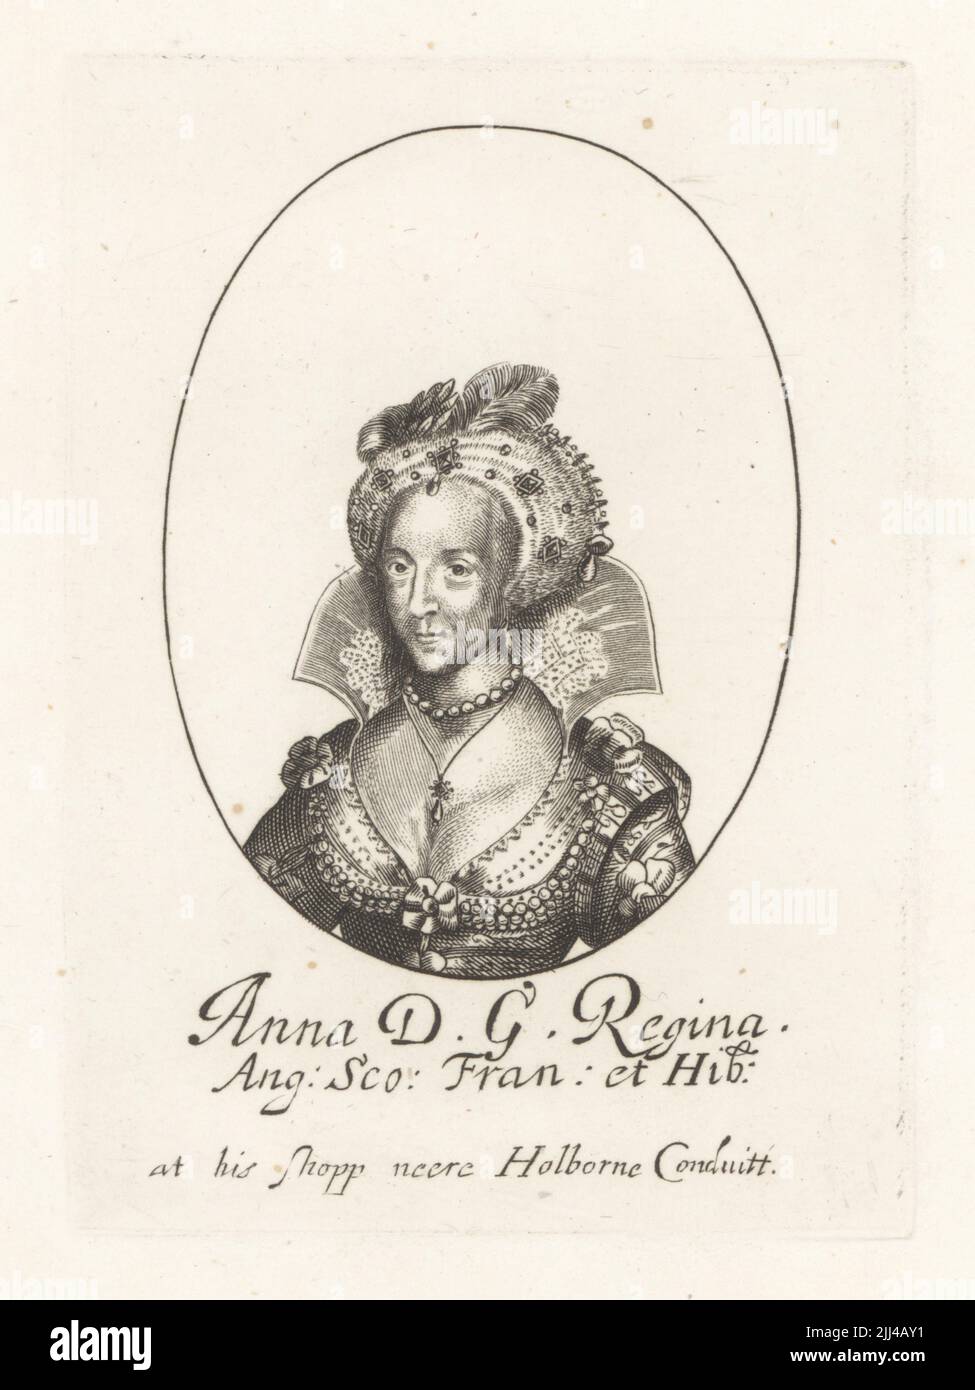 Anne of Denmark, queen of James VI of Scotland, later James I of England. In jeweled turban, standing lace collar, pearl necklace, embroidered gown. Anna DG Regina Ang Sco Fran et Hib. From William Faithorne's set of Kings, sold at his shop near Holborne Conduitt. Copperplate engraving from Samuel Woodburn’s Gallery of Rare Portraits Consisting of Original Plates, George Jones, 102 St Martin’s Lane, London, 1816. Stock Photo